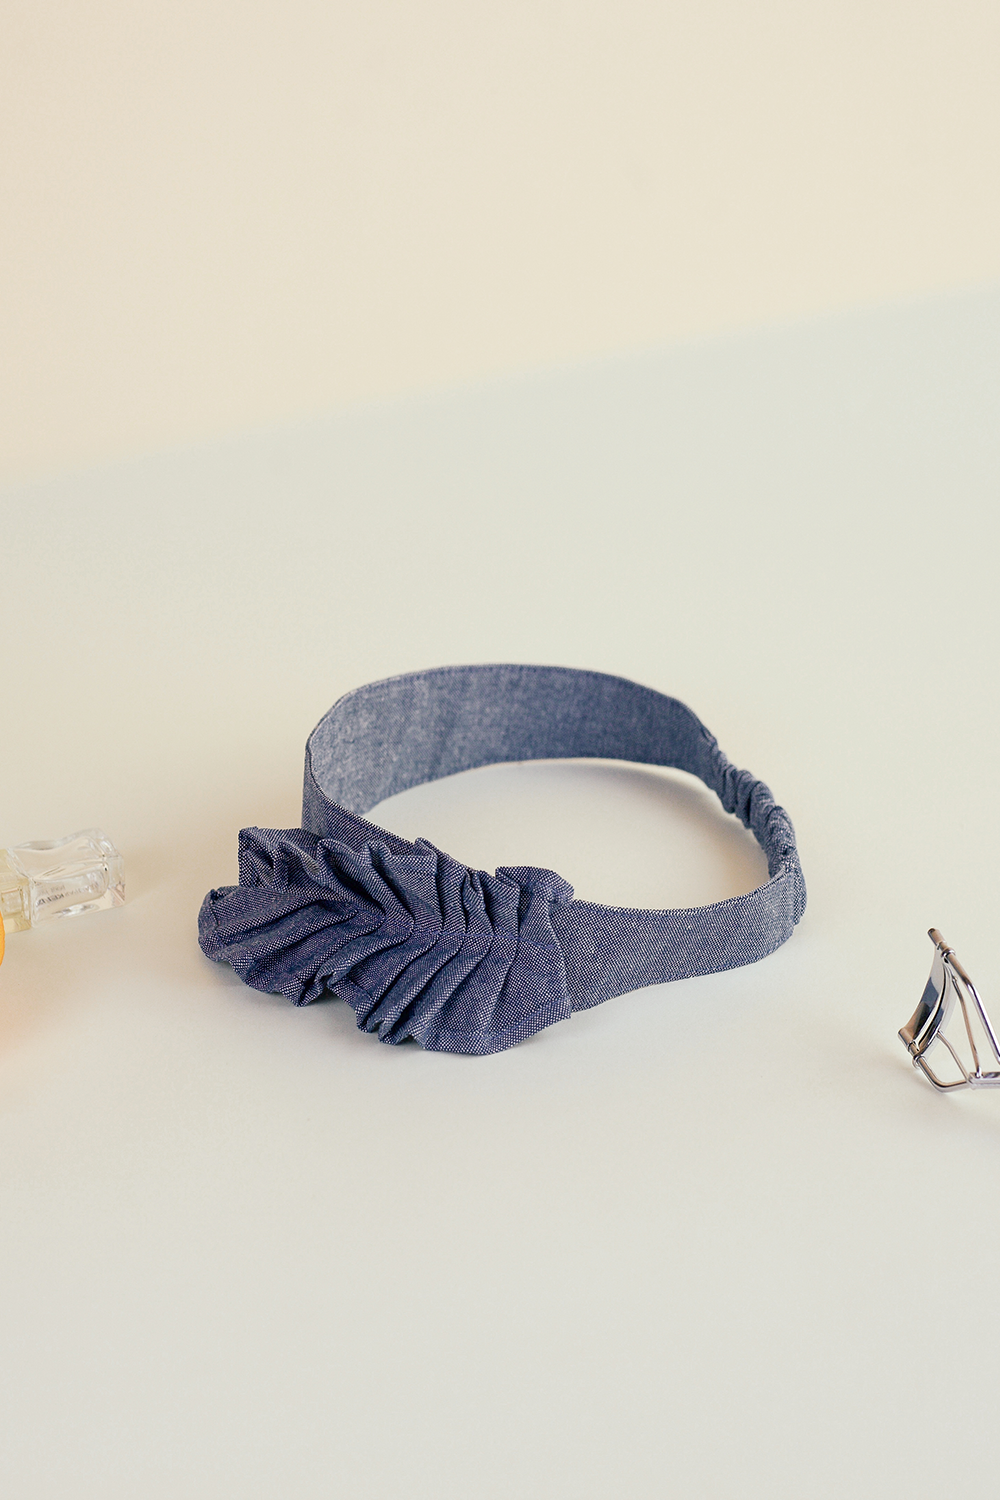 Origami bandeau, Everyday cool objects, Refinity by Leinné, Upcycled Fabrics, Eco luxury